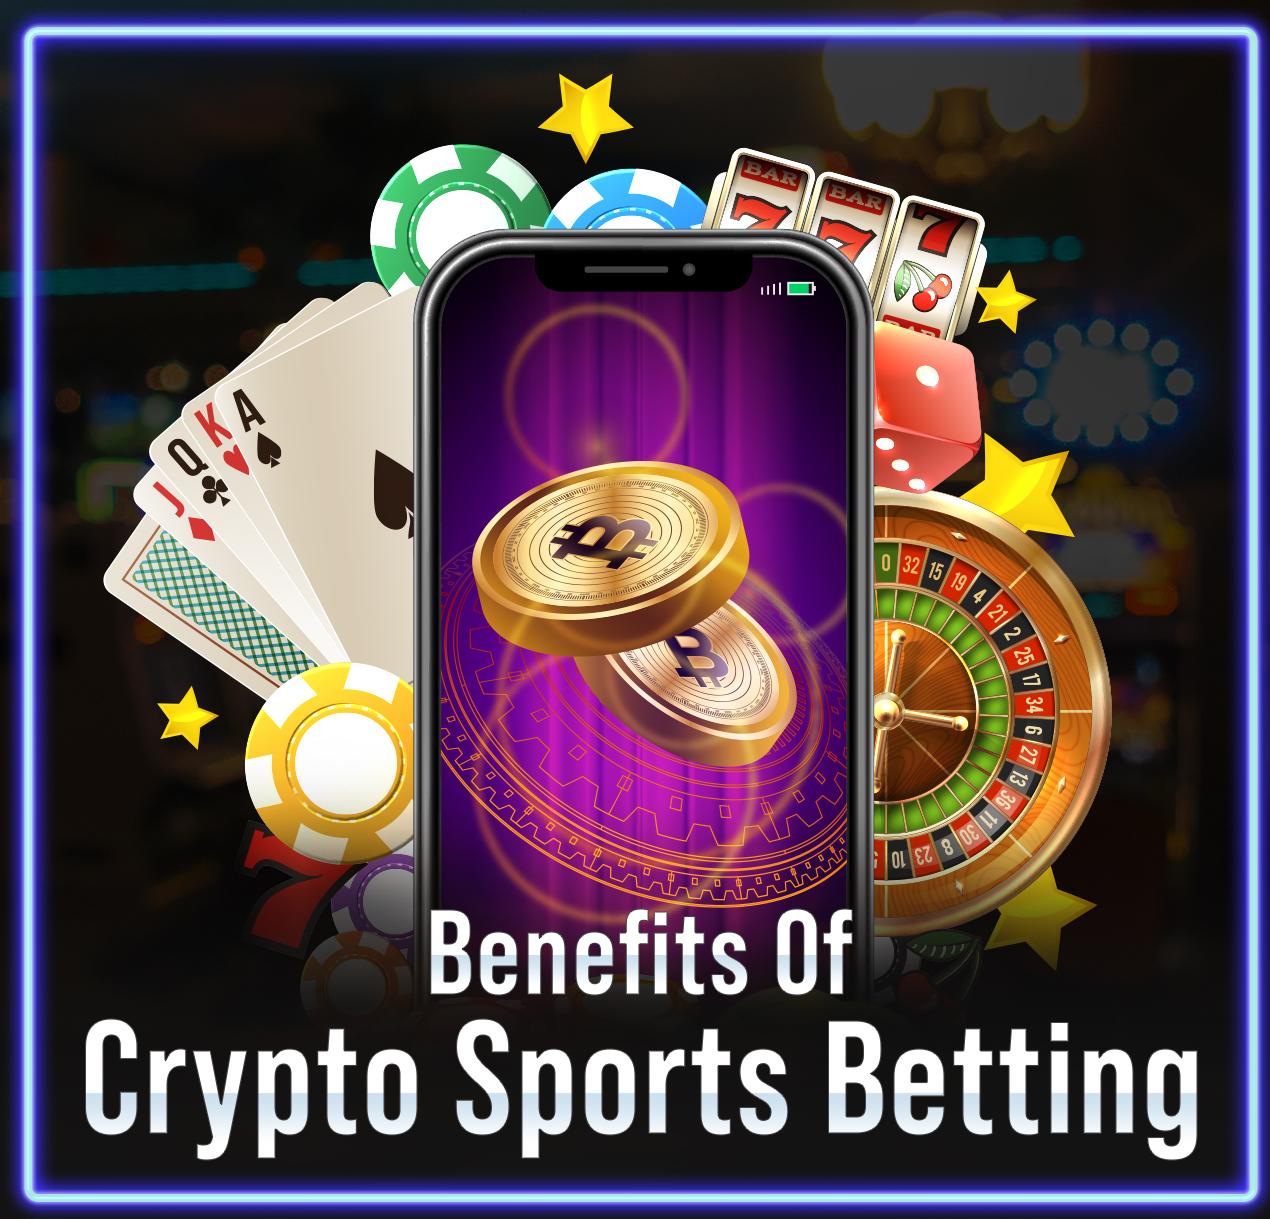 Benefits of crypto sports betting